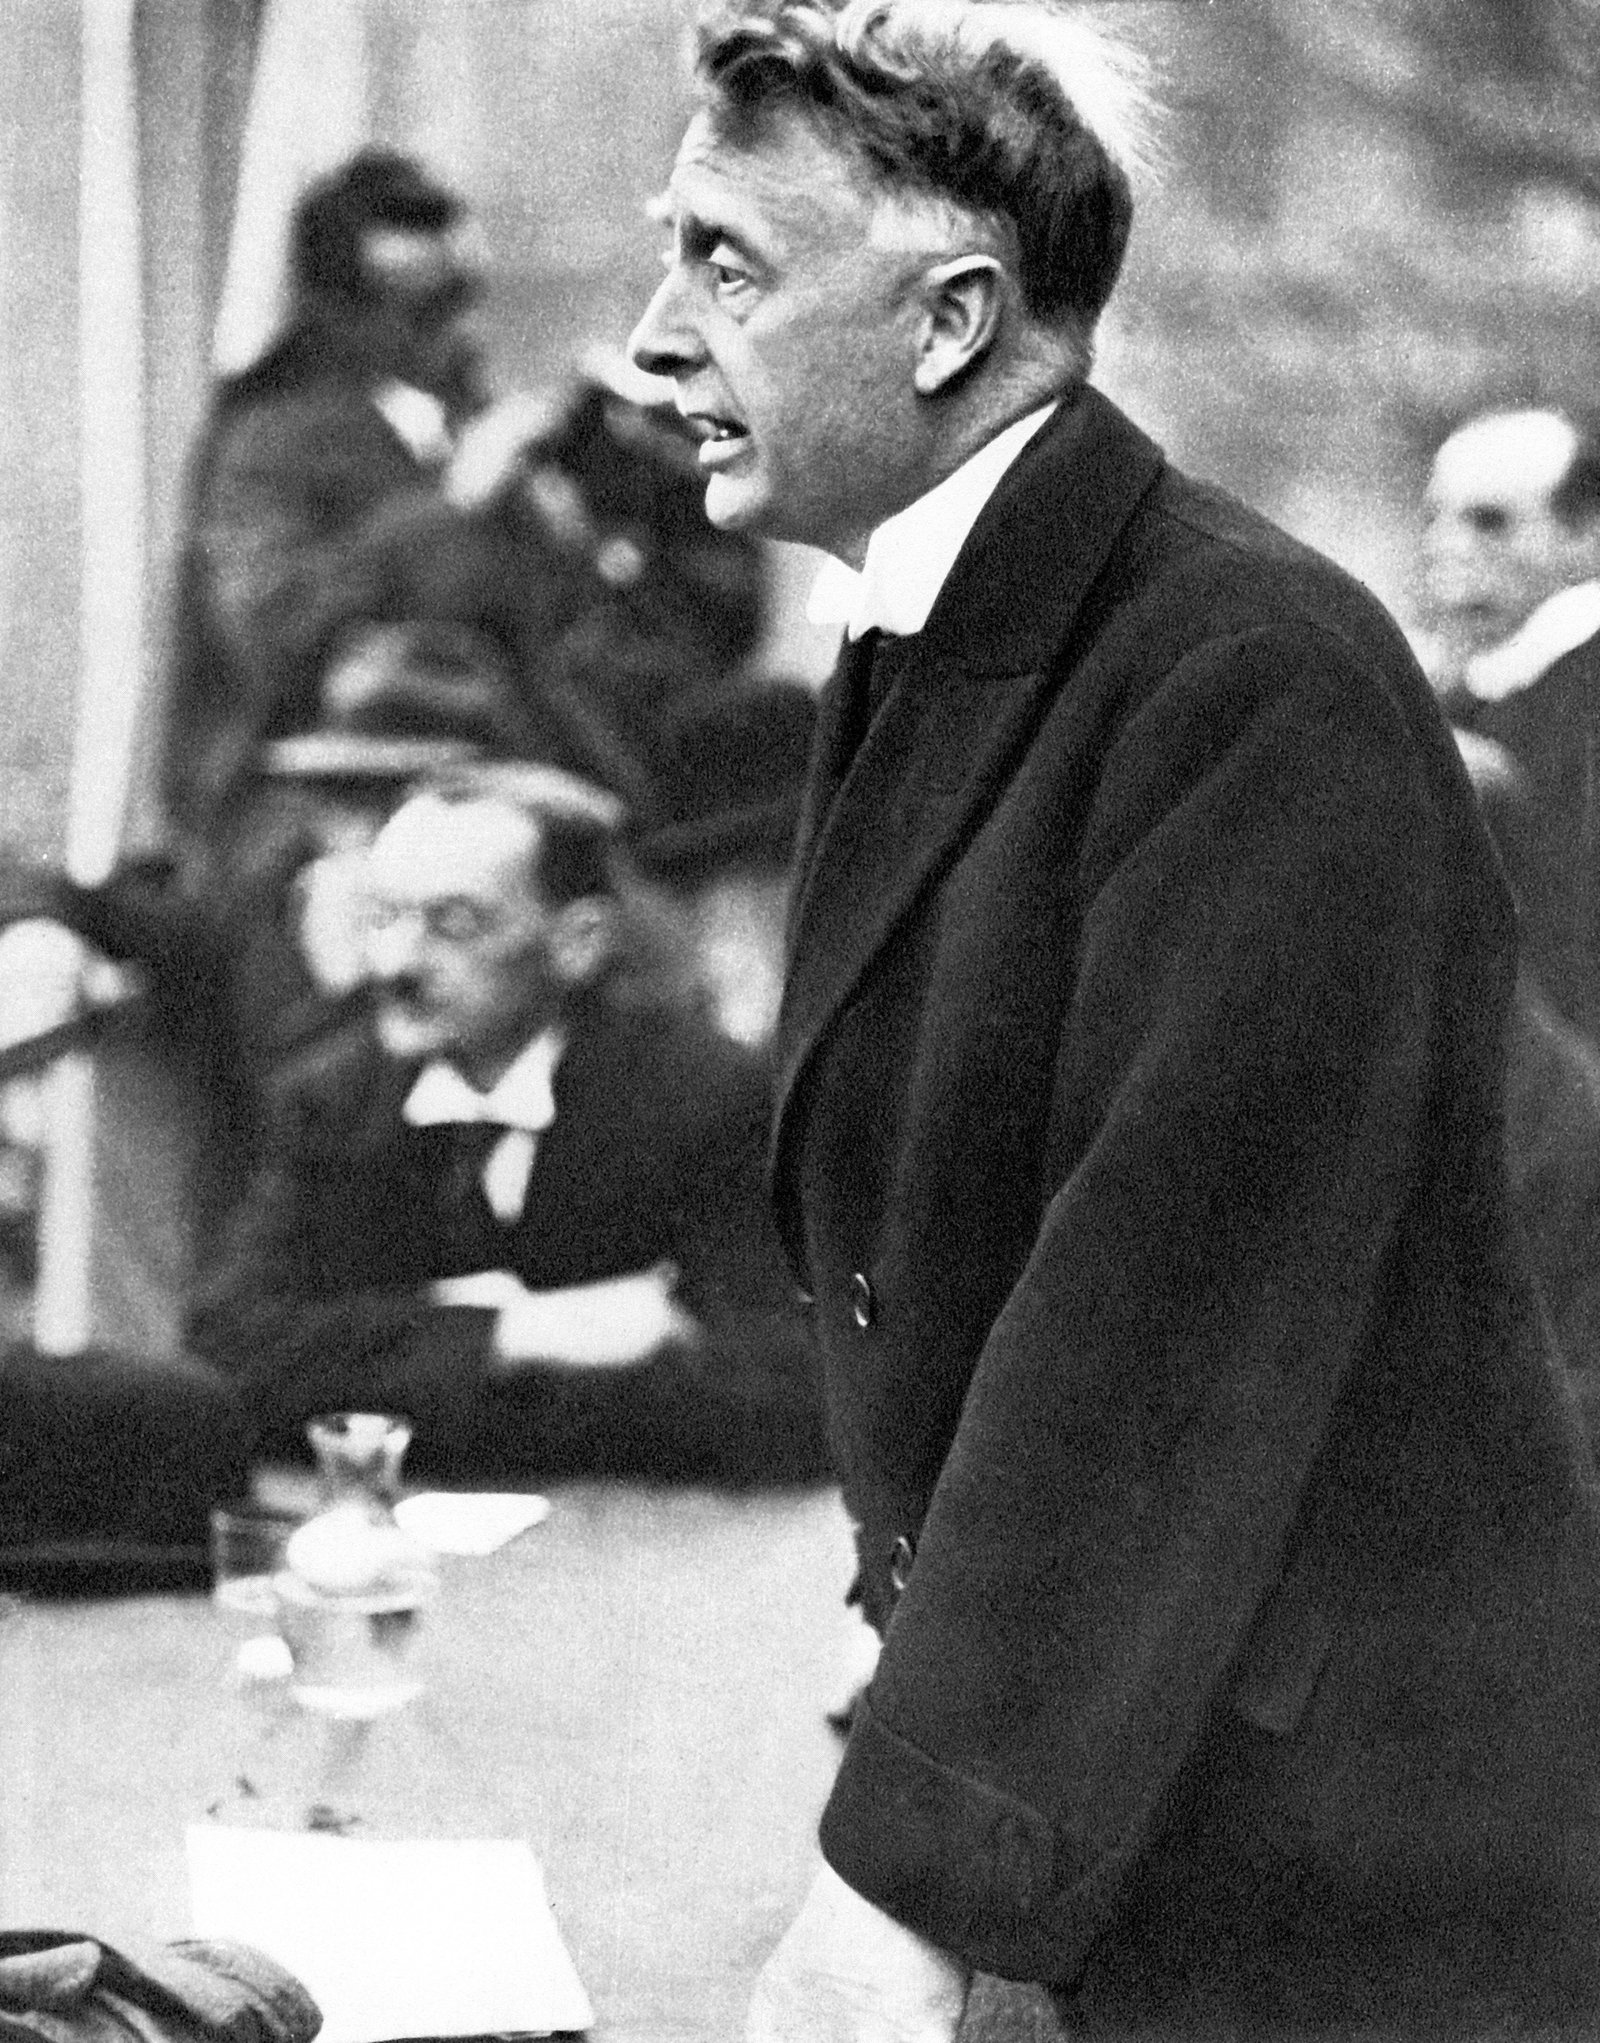 Image - W.T. Cosgrave became President of Dáil Éirean in September 1922, not long before the Dáil approved new regulations for the trial of suspects working against the government. Photo: Culture Club/Getty Images